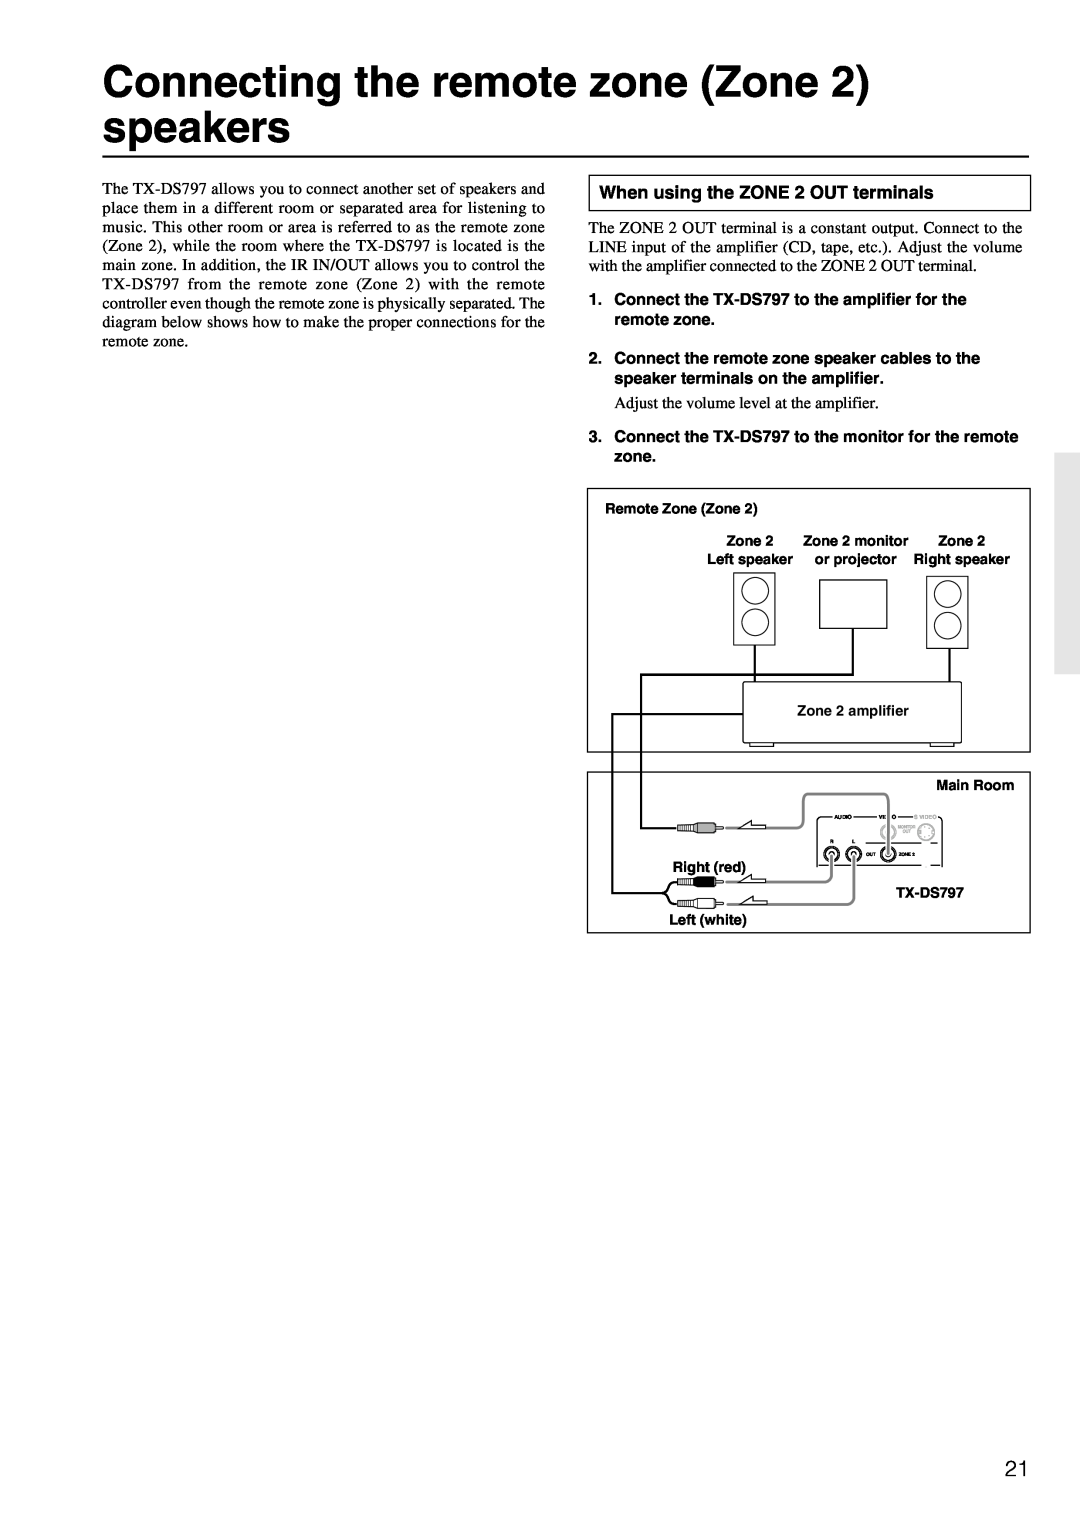 Onkyo TX-DS797 instruction manual Connecting the remote zone Zone 2 speakers, When using the ZONE 2 OUT terminals 